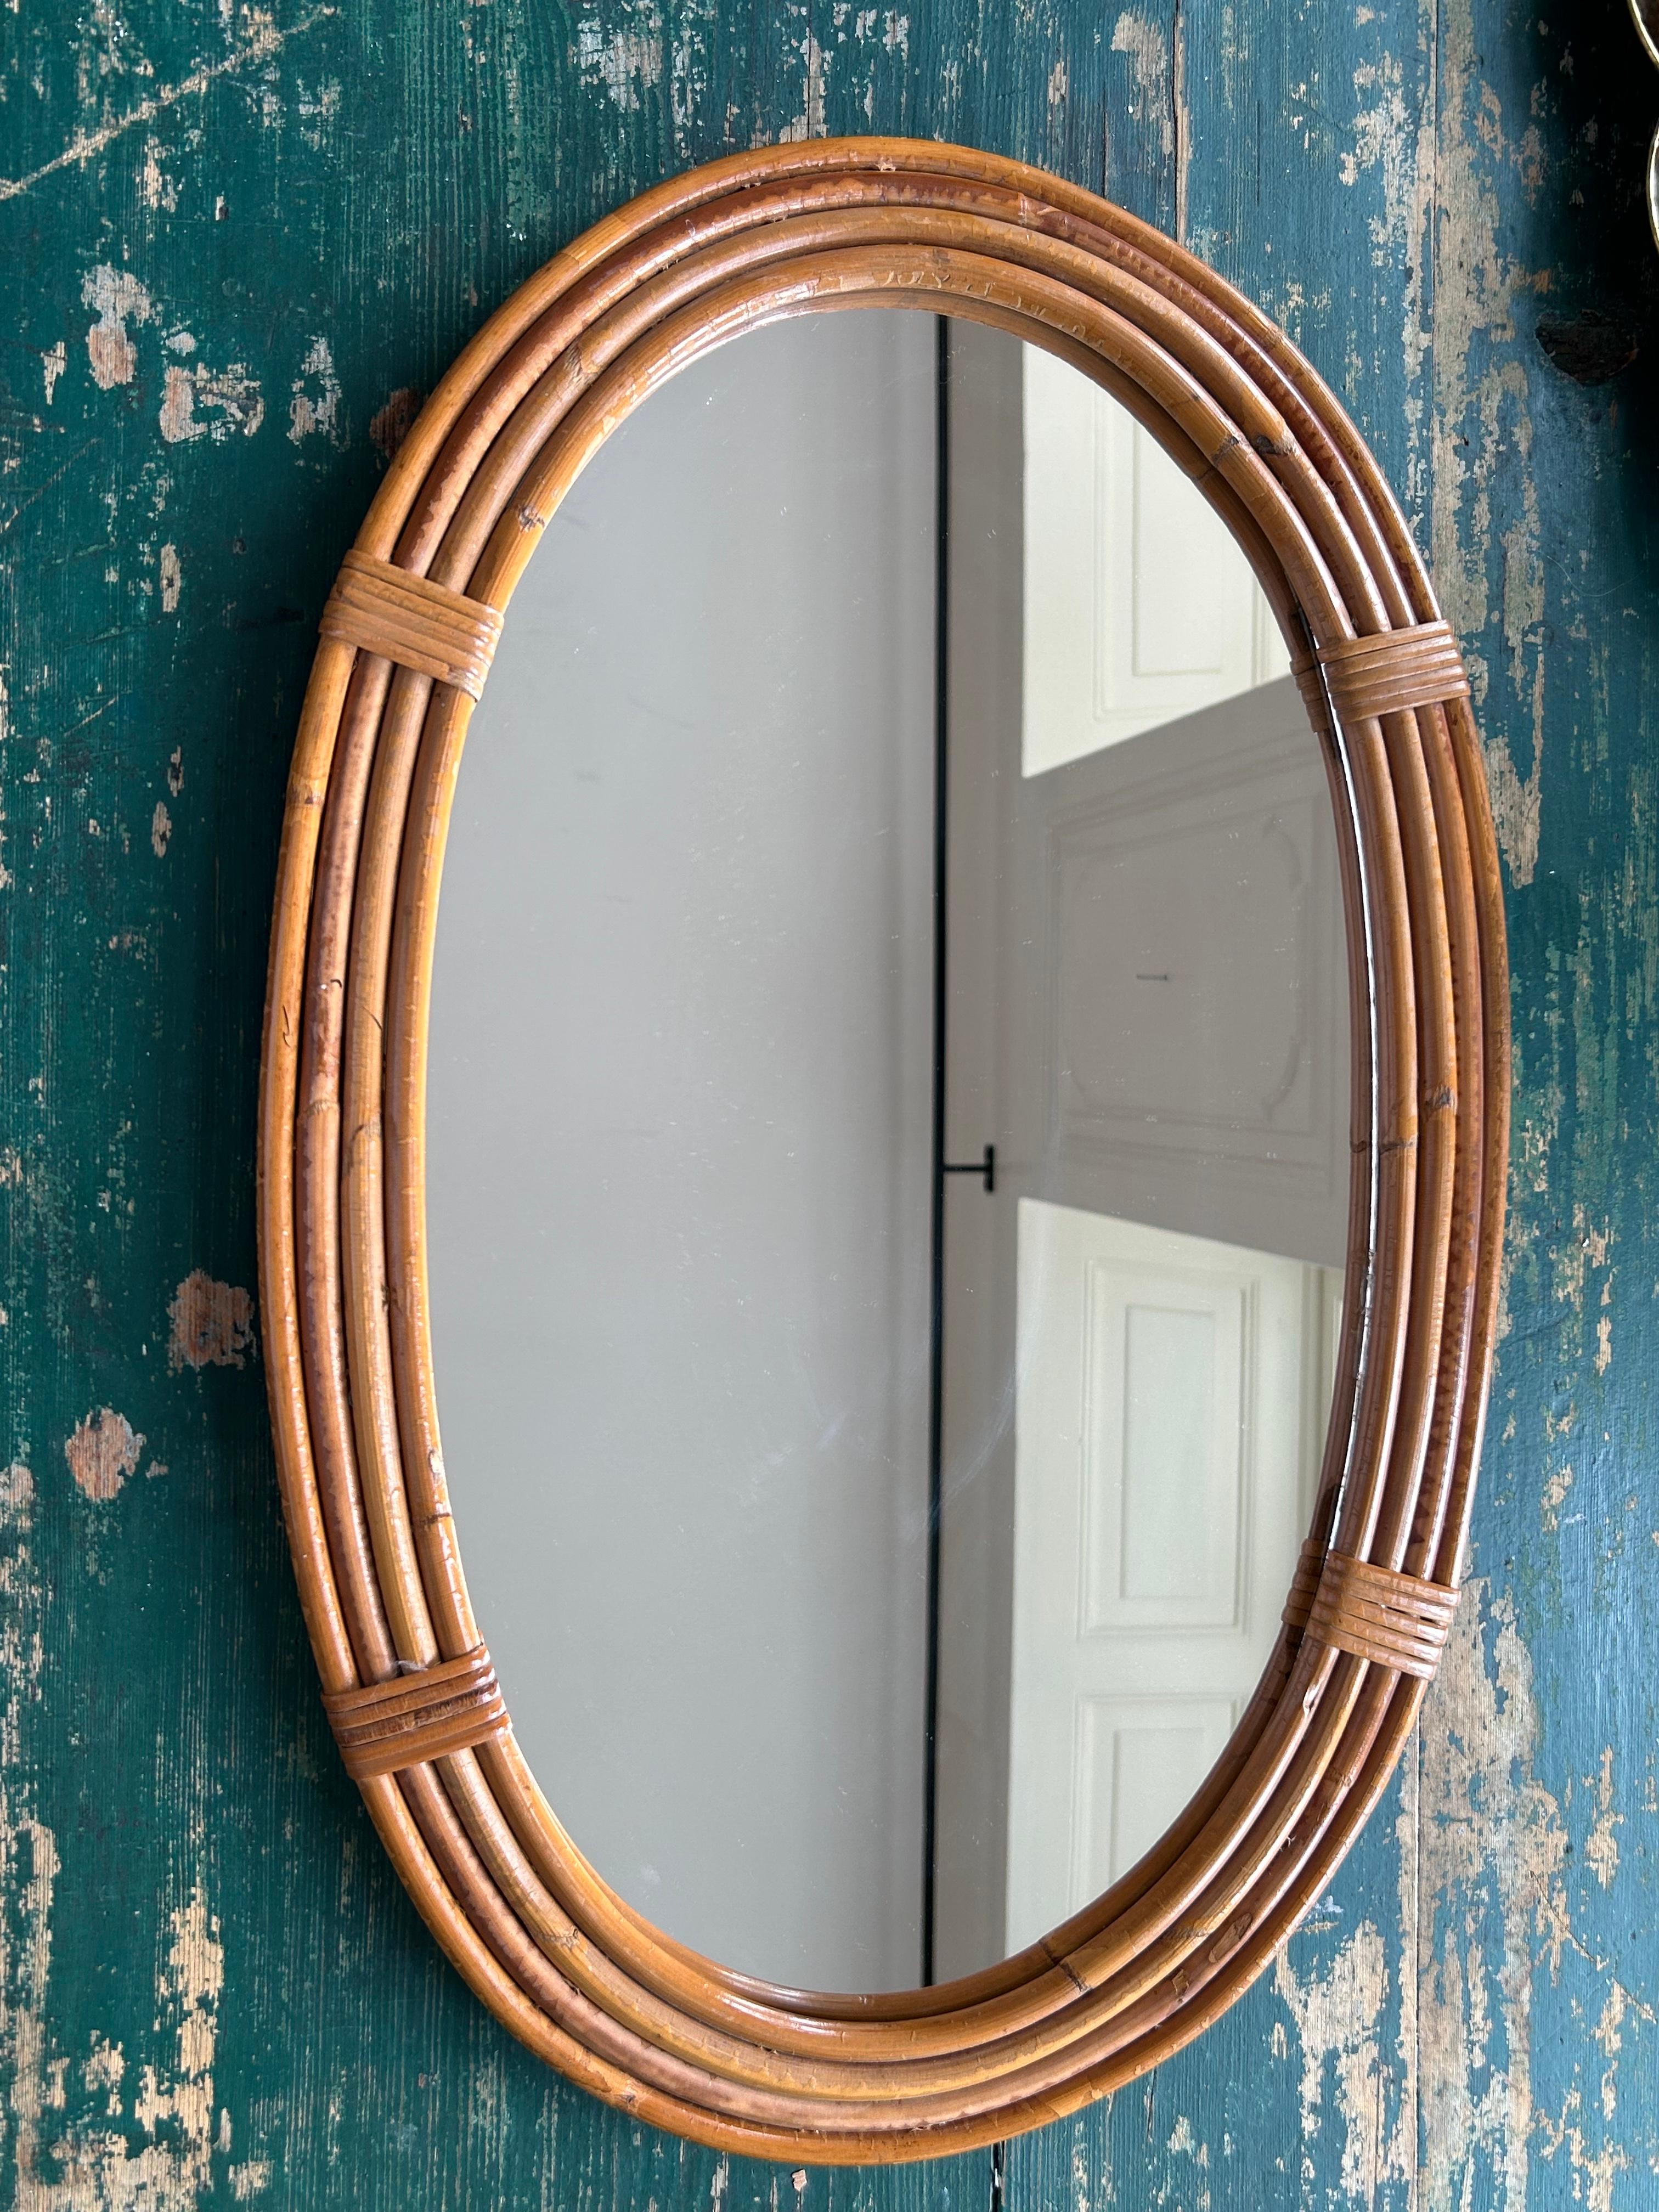 French Vintage Round Oval Mirror in Rattan Frame, France, 1950s For Sale